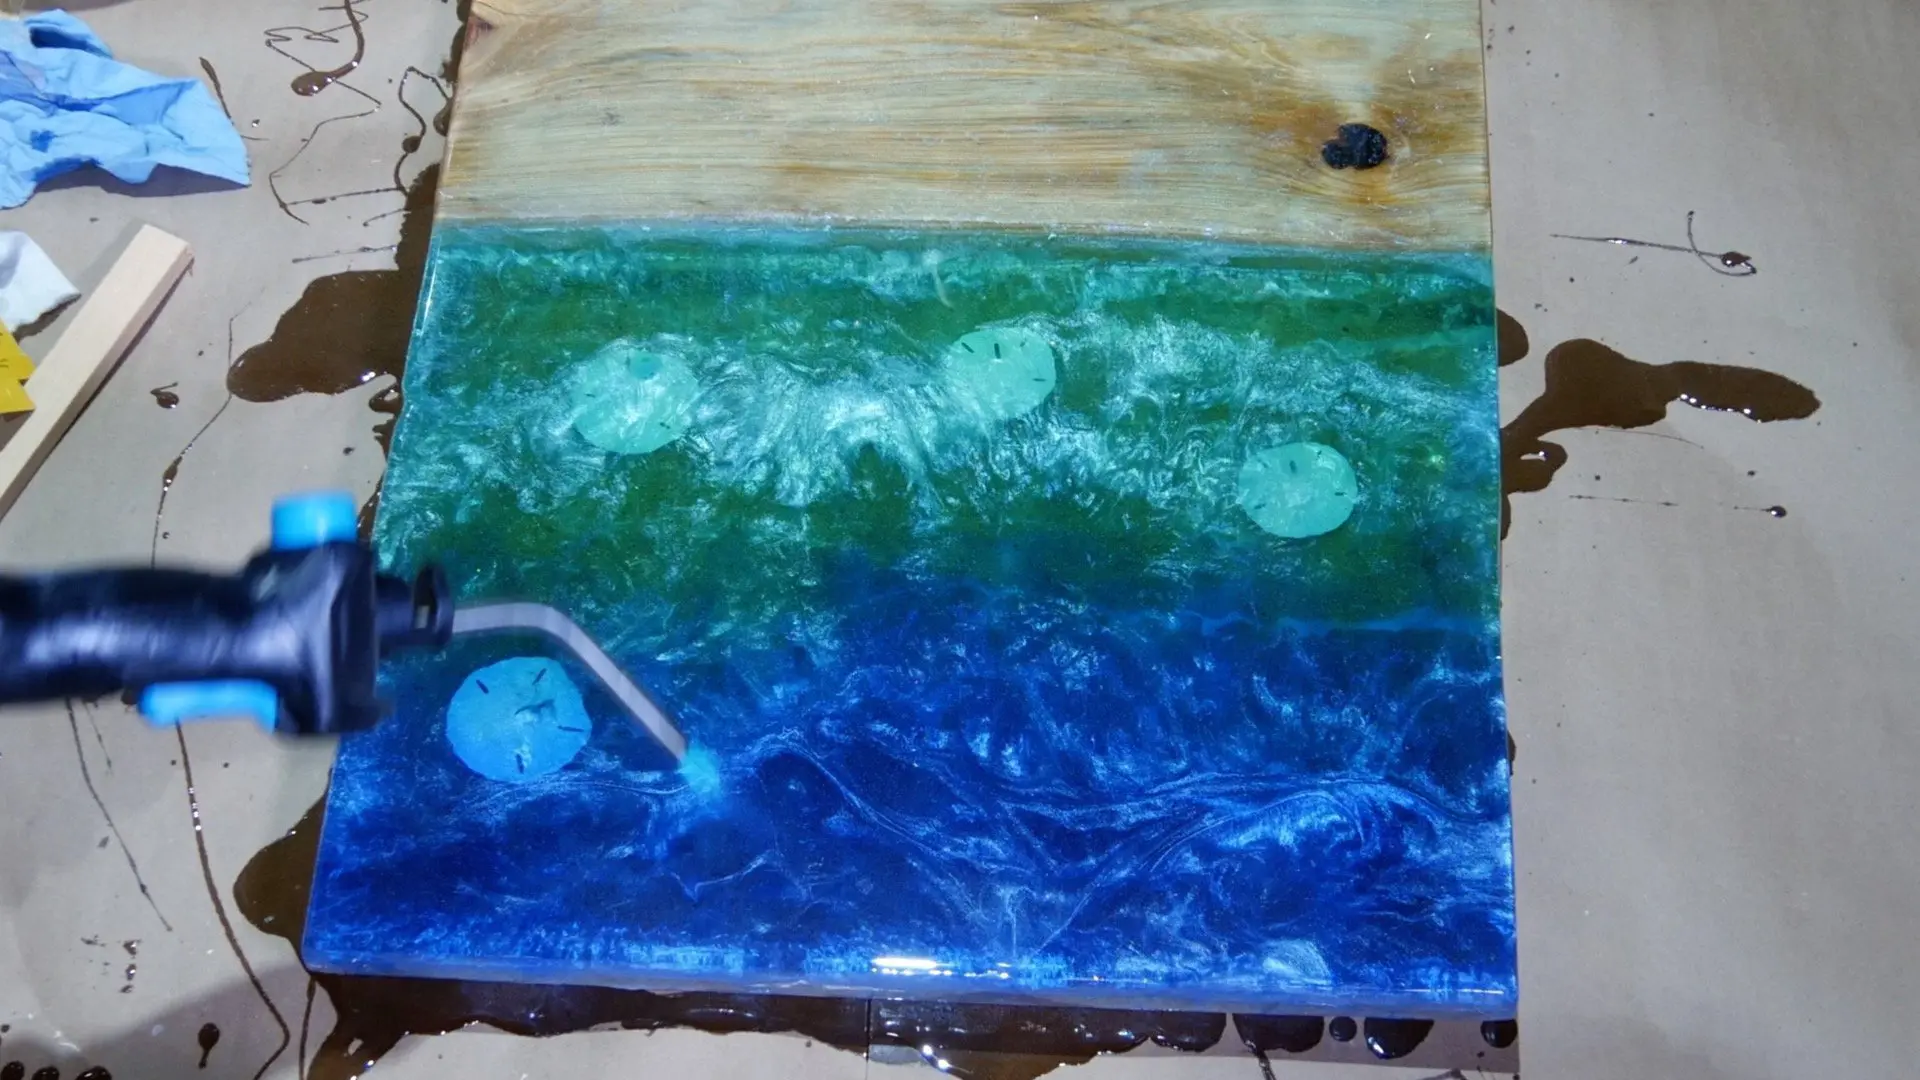 DIY Wood and Resin Beach Art with Real Sand_flood coat remove air pockets